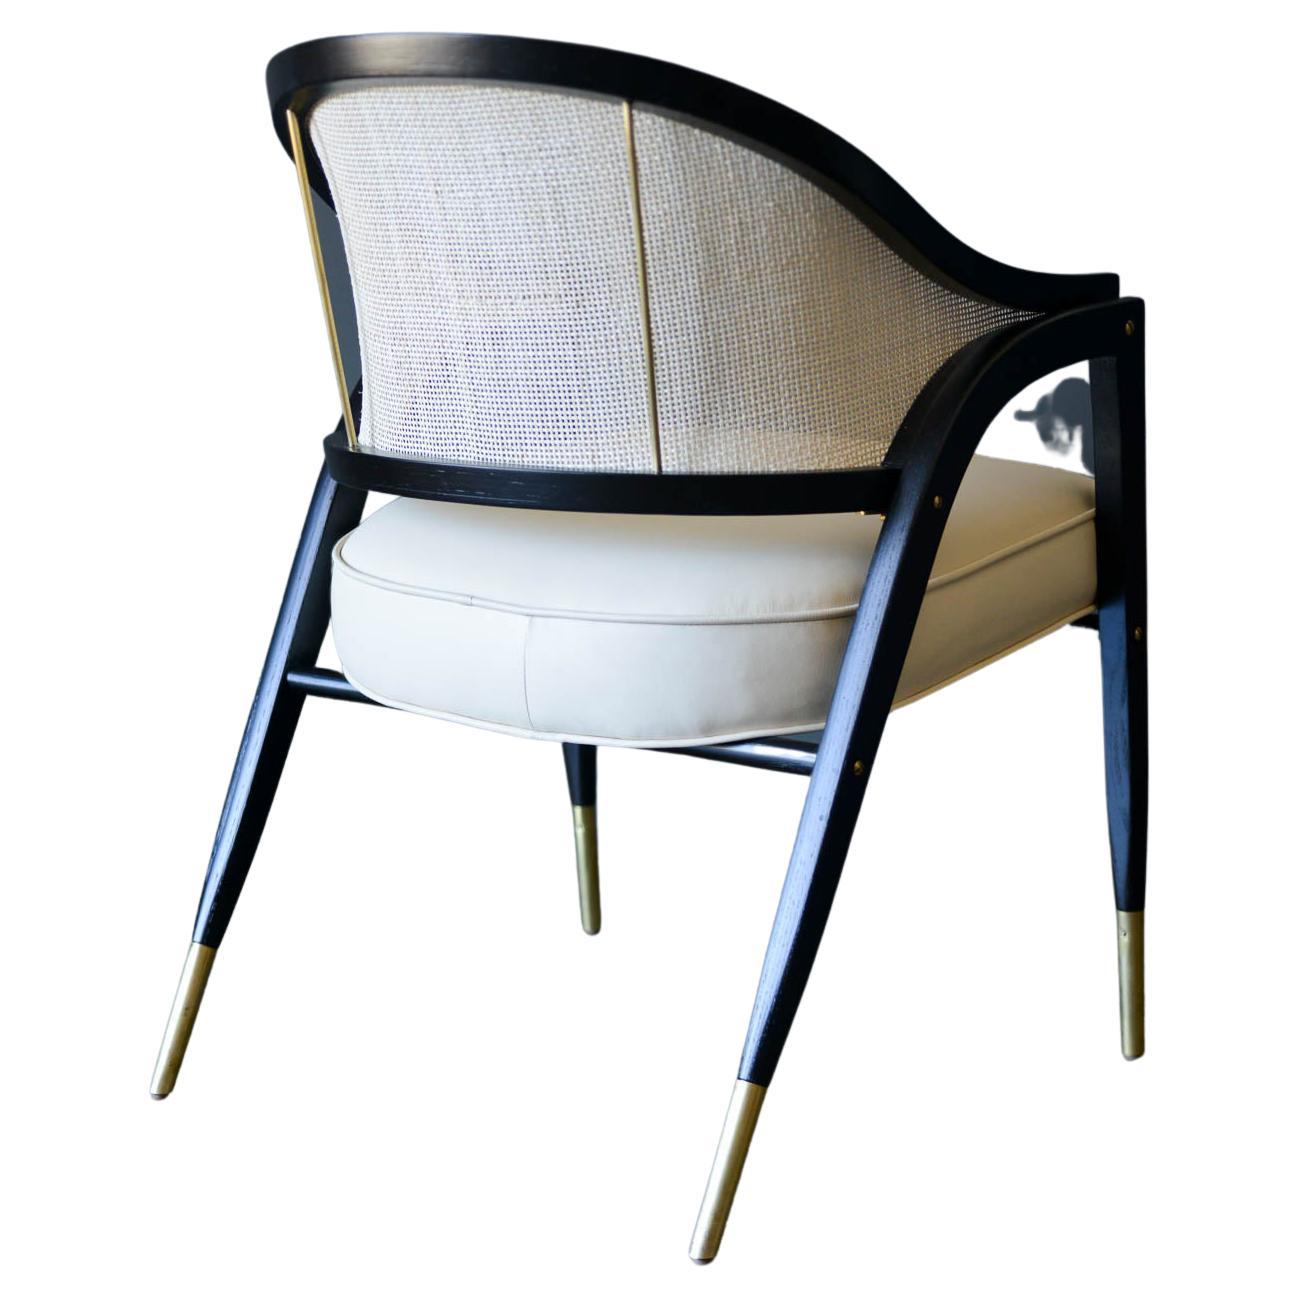 Edward Wormley for Dunbar style 5480 sculpted armchair, circa 1955. Fully restored, ebonized frame with new ivory leather upholstery and new cane back. Beautiful brass detailing has been polished and shines with no rust. Rare, hard to find in this